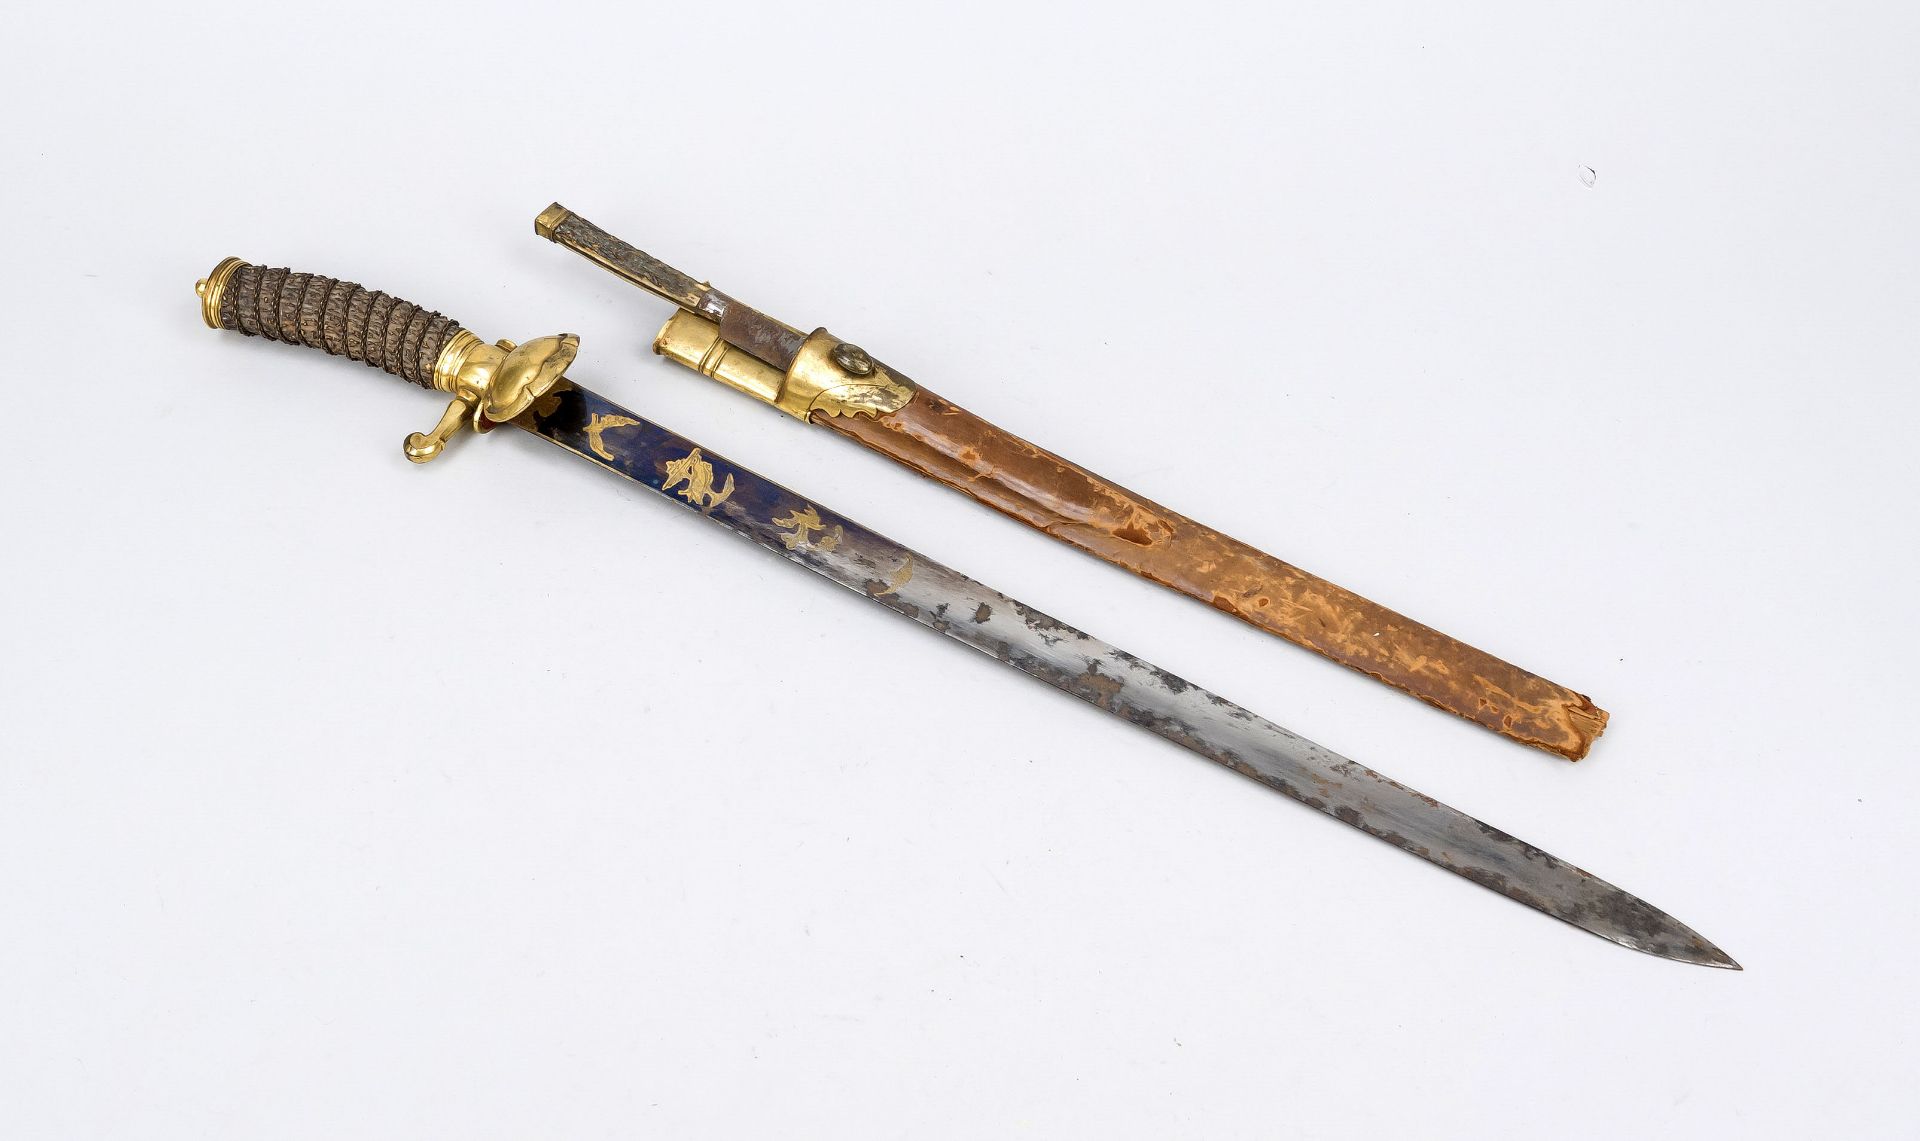 Stag hilt with by-knife, 19th century, staghorn grip with wire winding, gilt brass/bronze grip